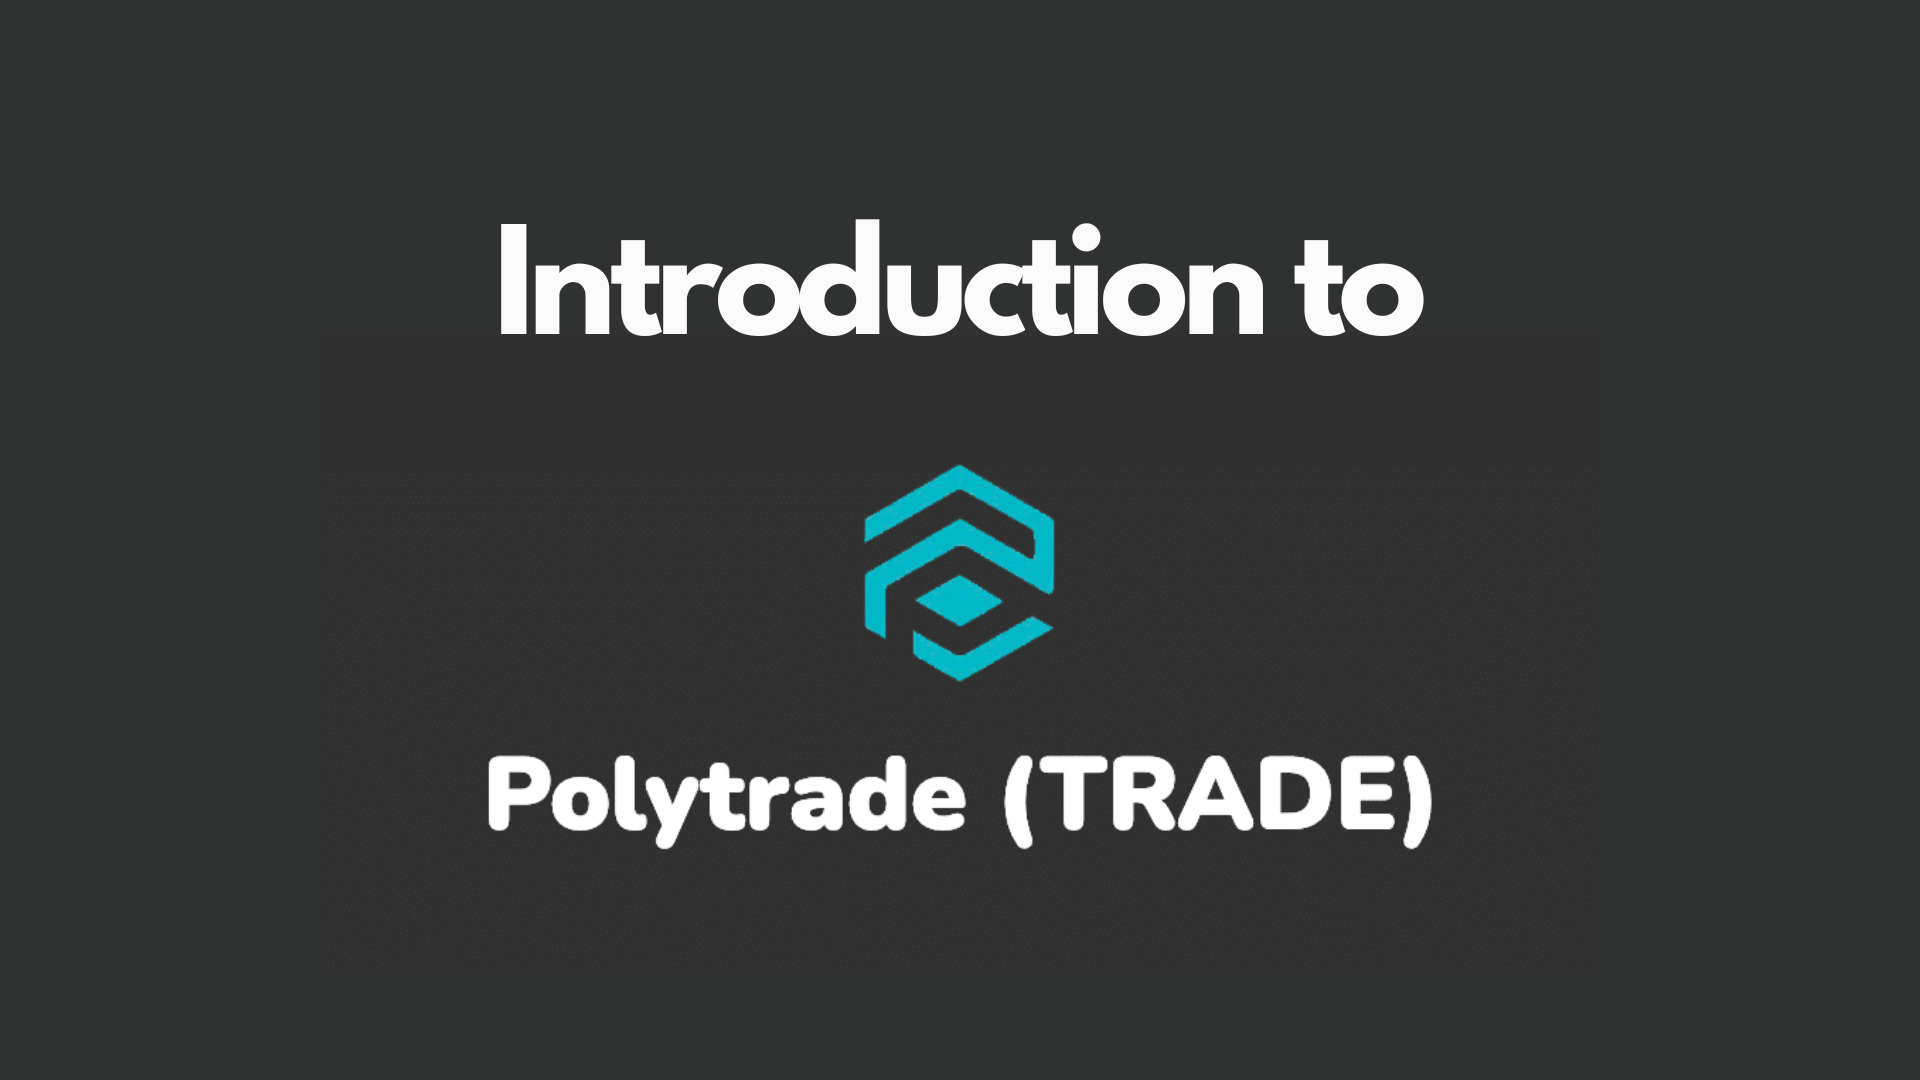 Introduction-to-polytrade